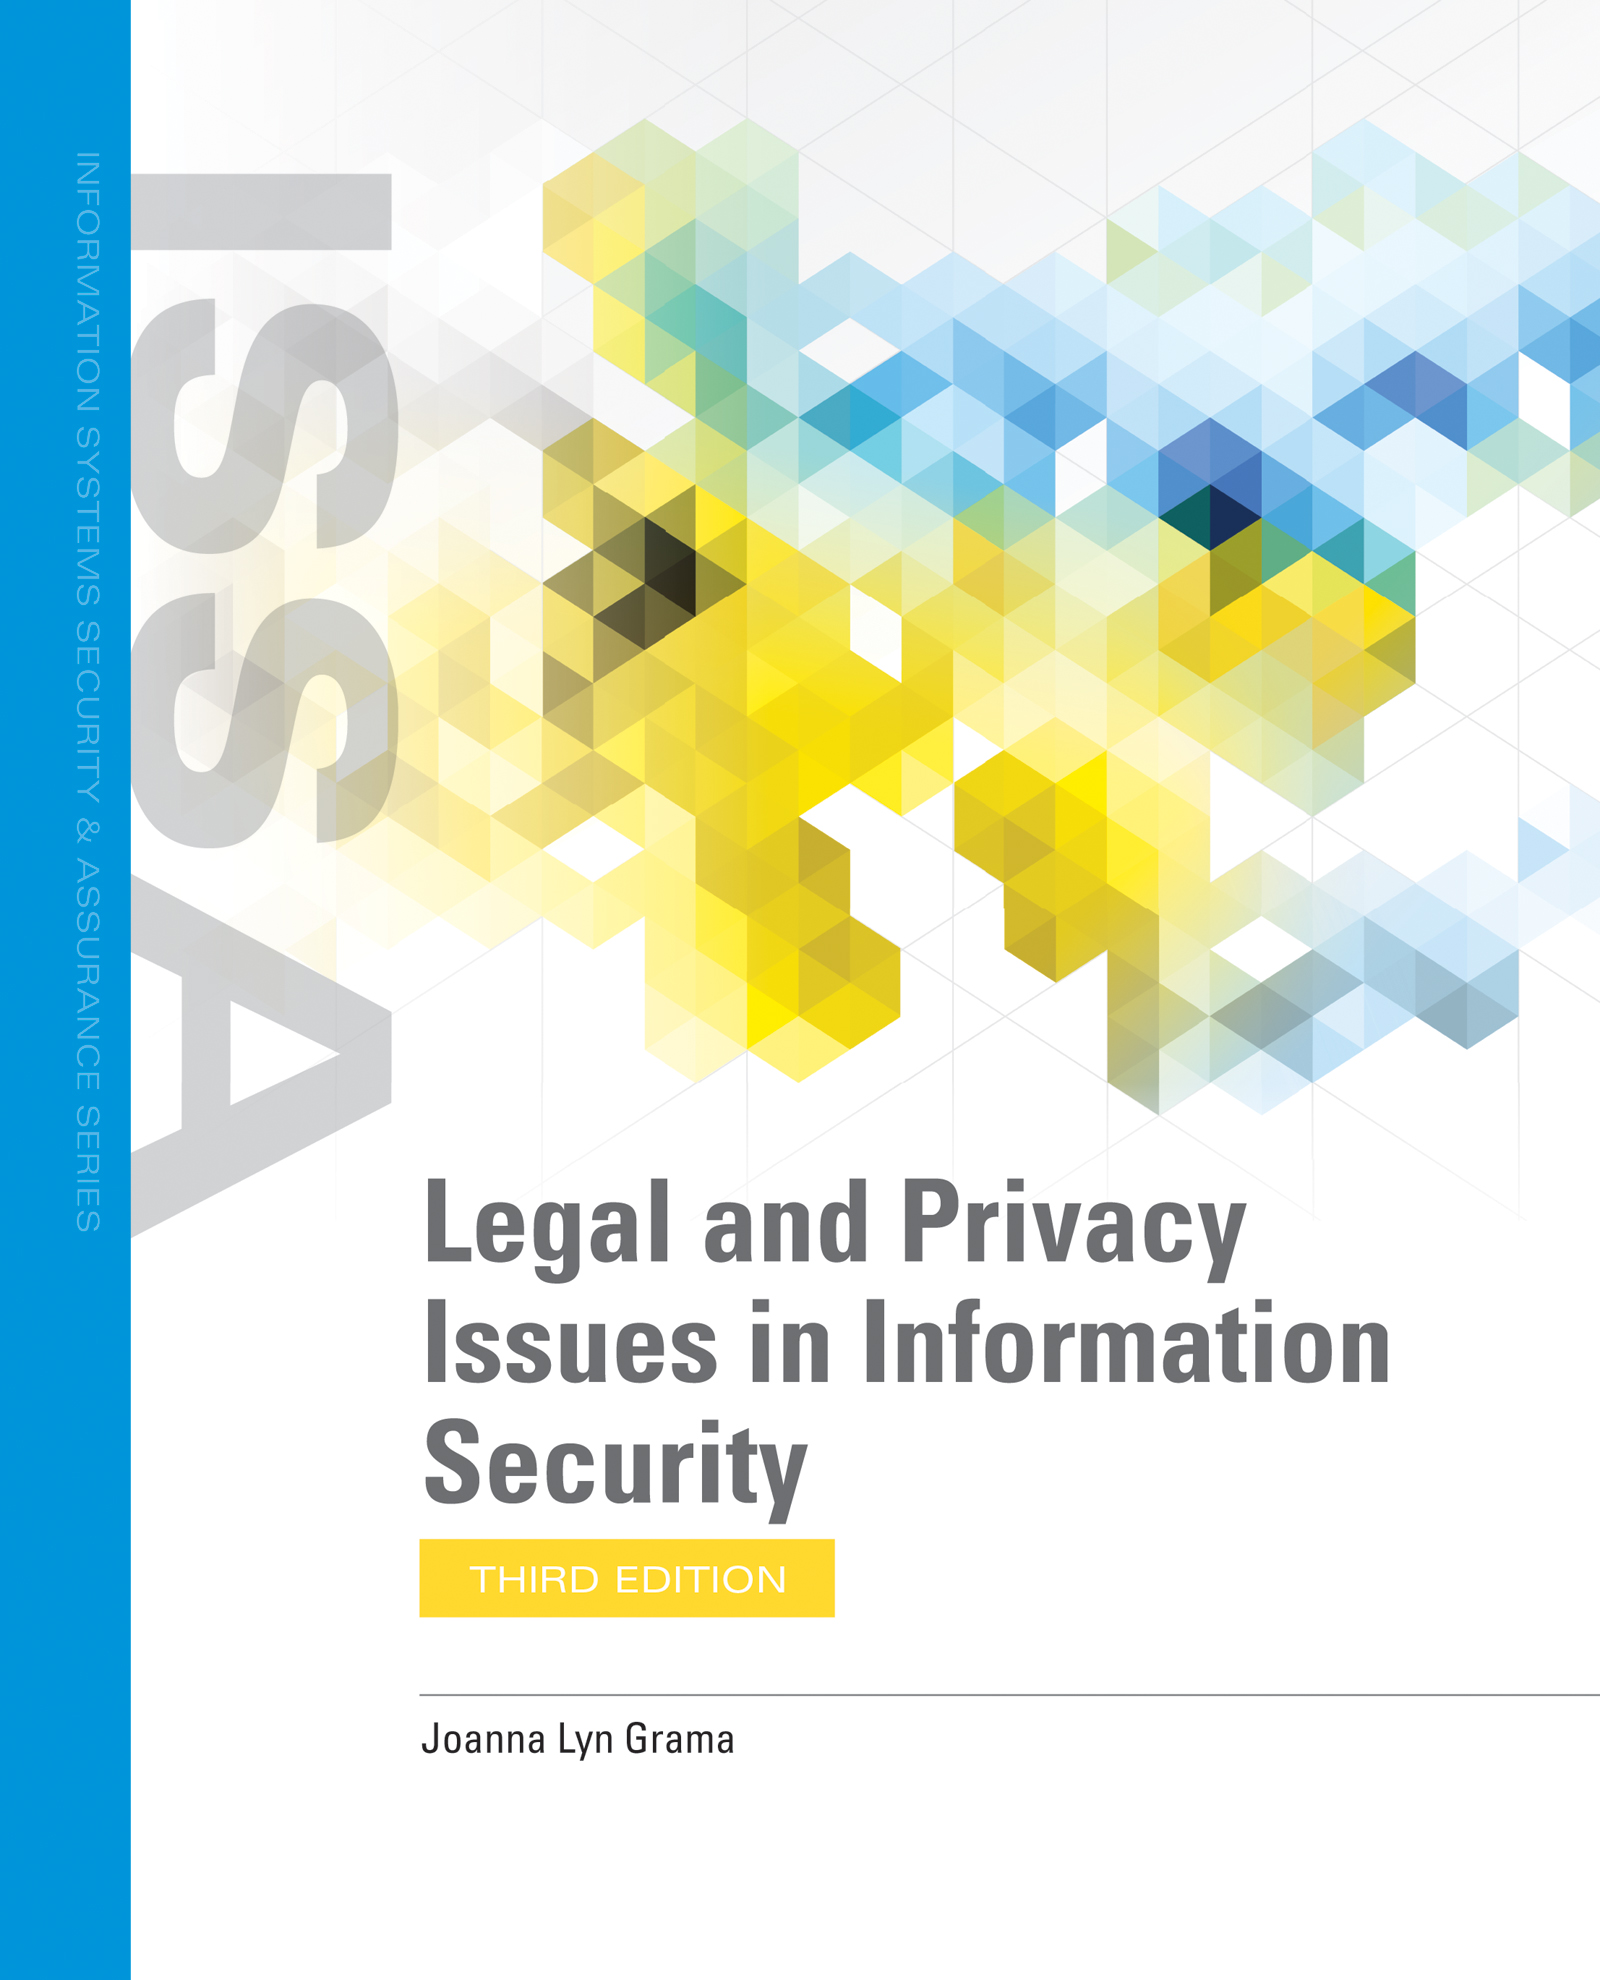 Cover: Legal and Privacy Issues in Information Security, Third Edition by Joanna Lyn Grama